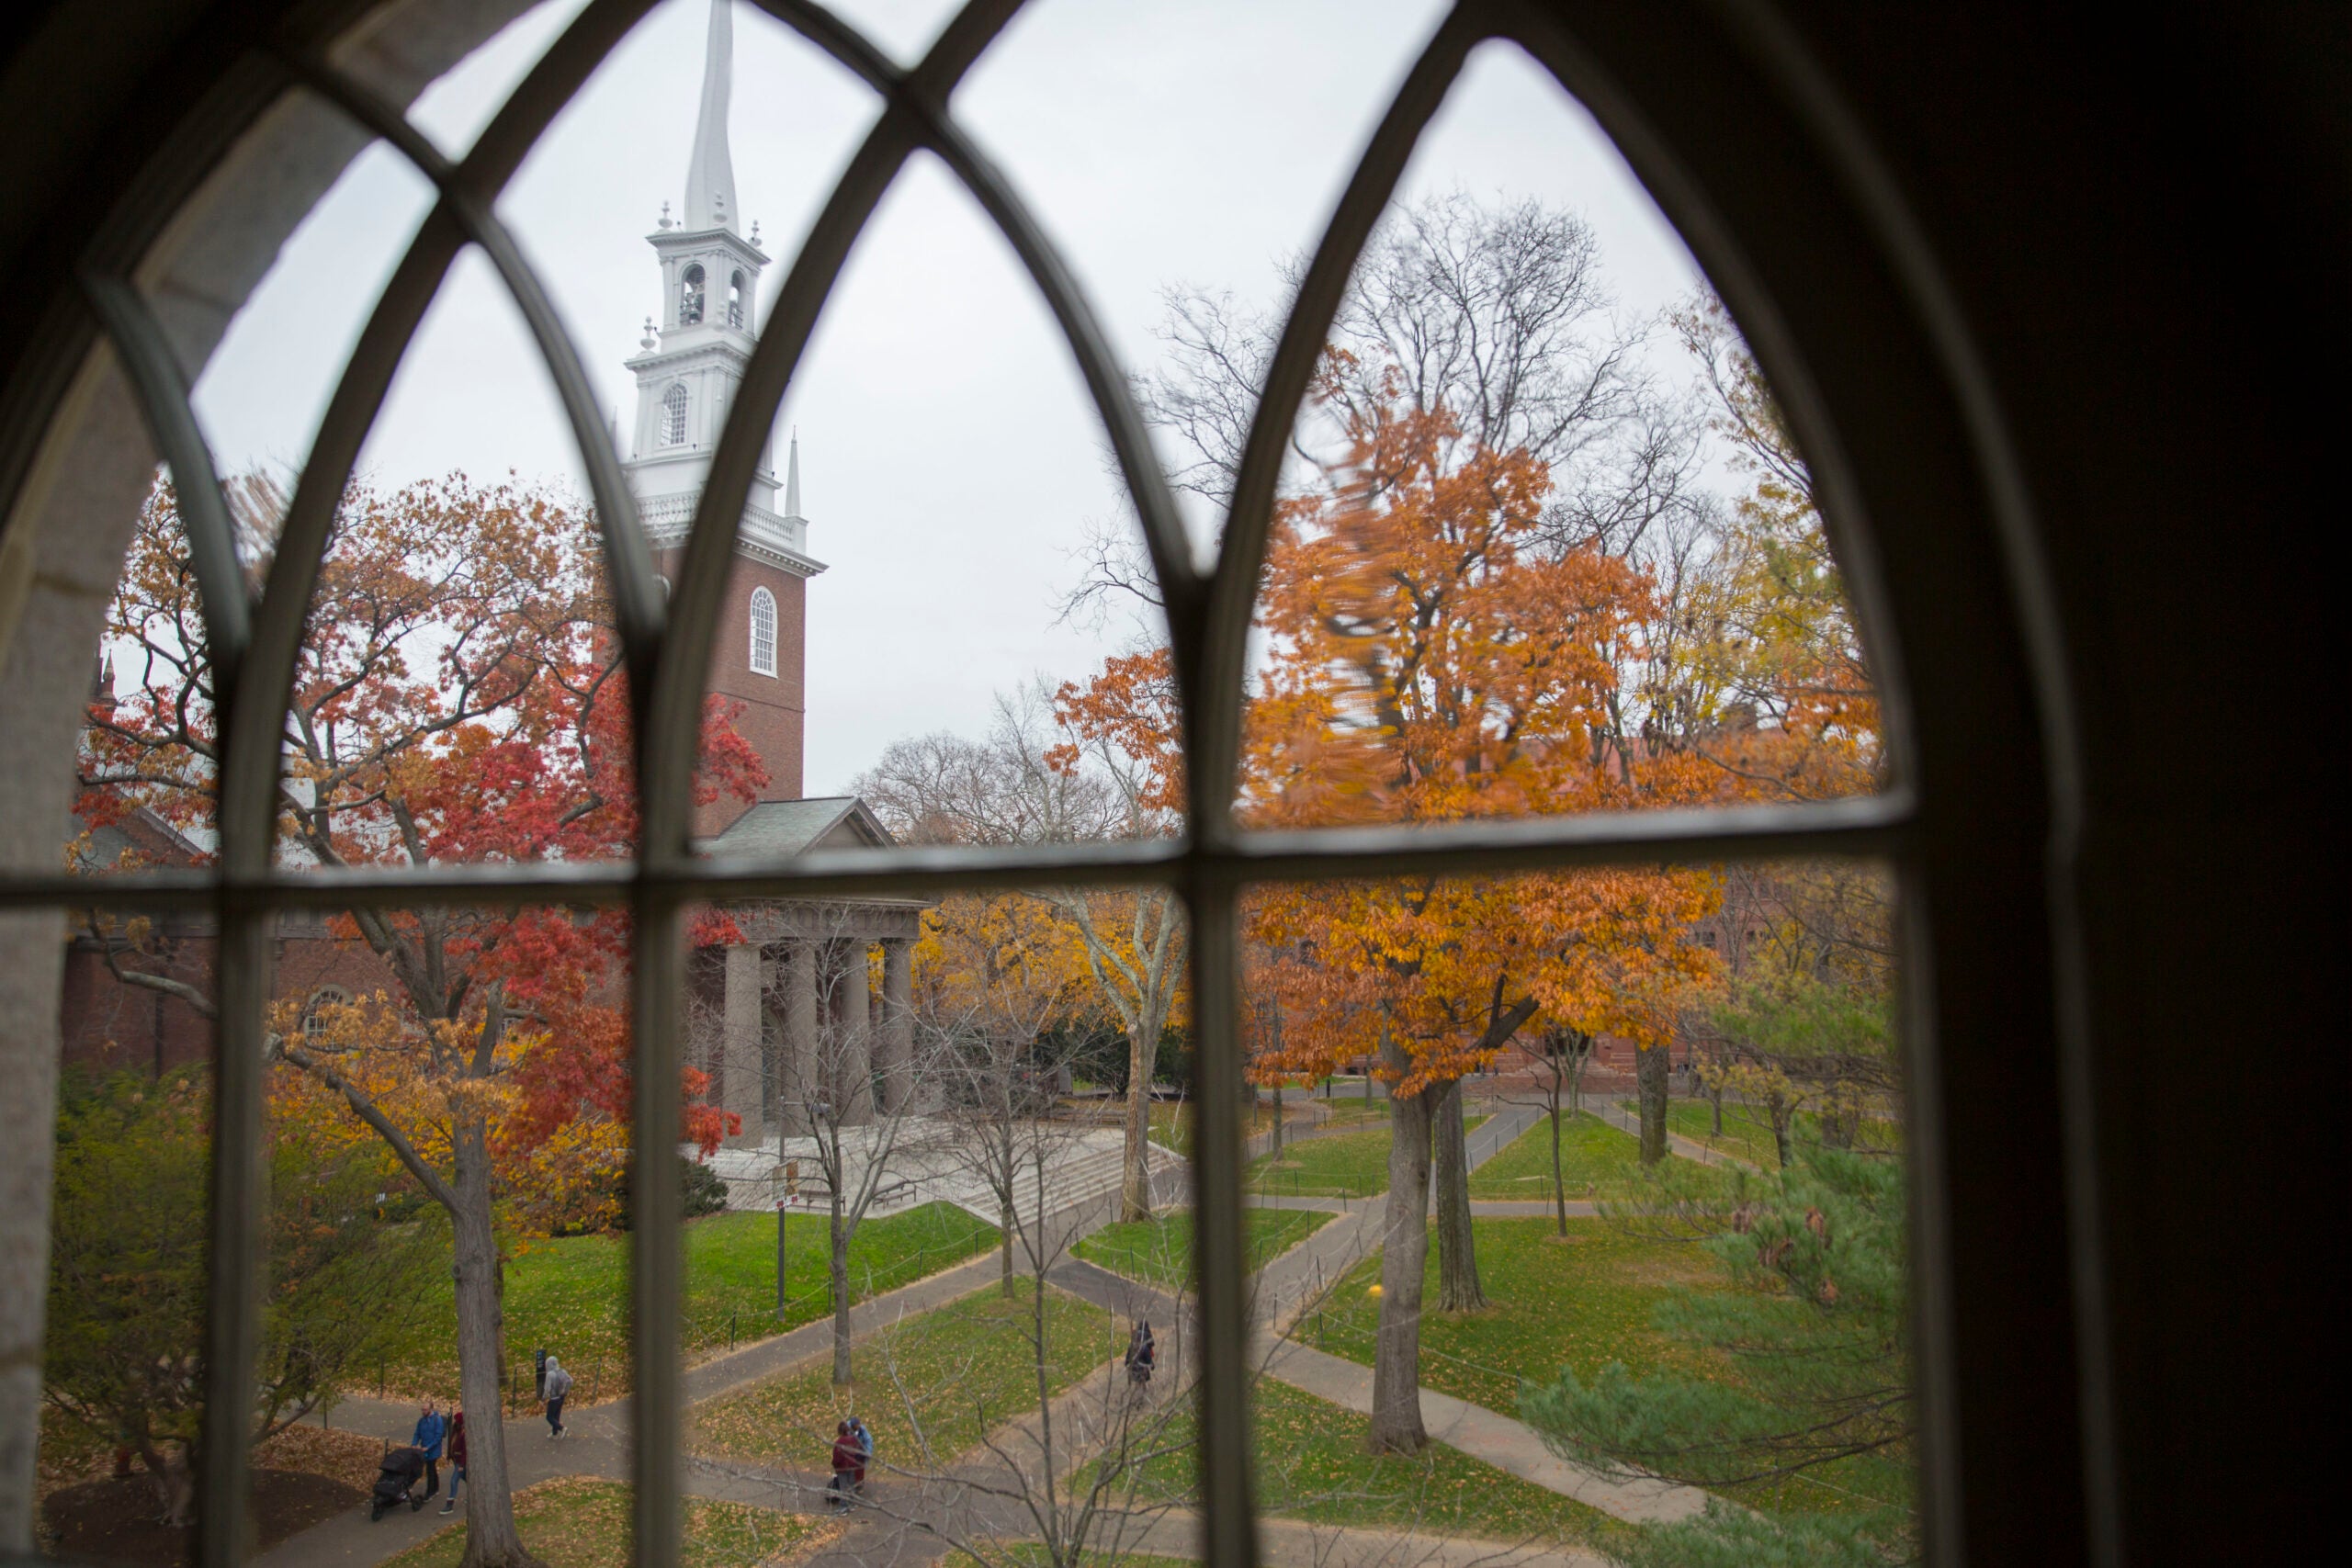 A view of Harvard Yard from a window